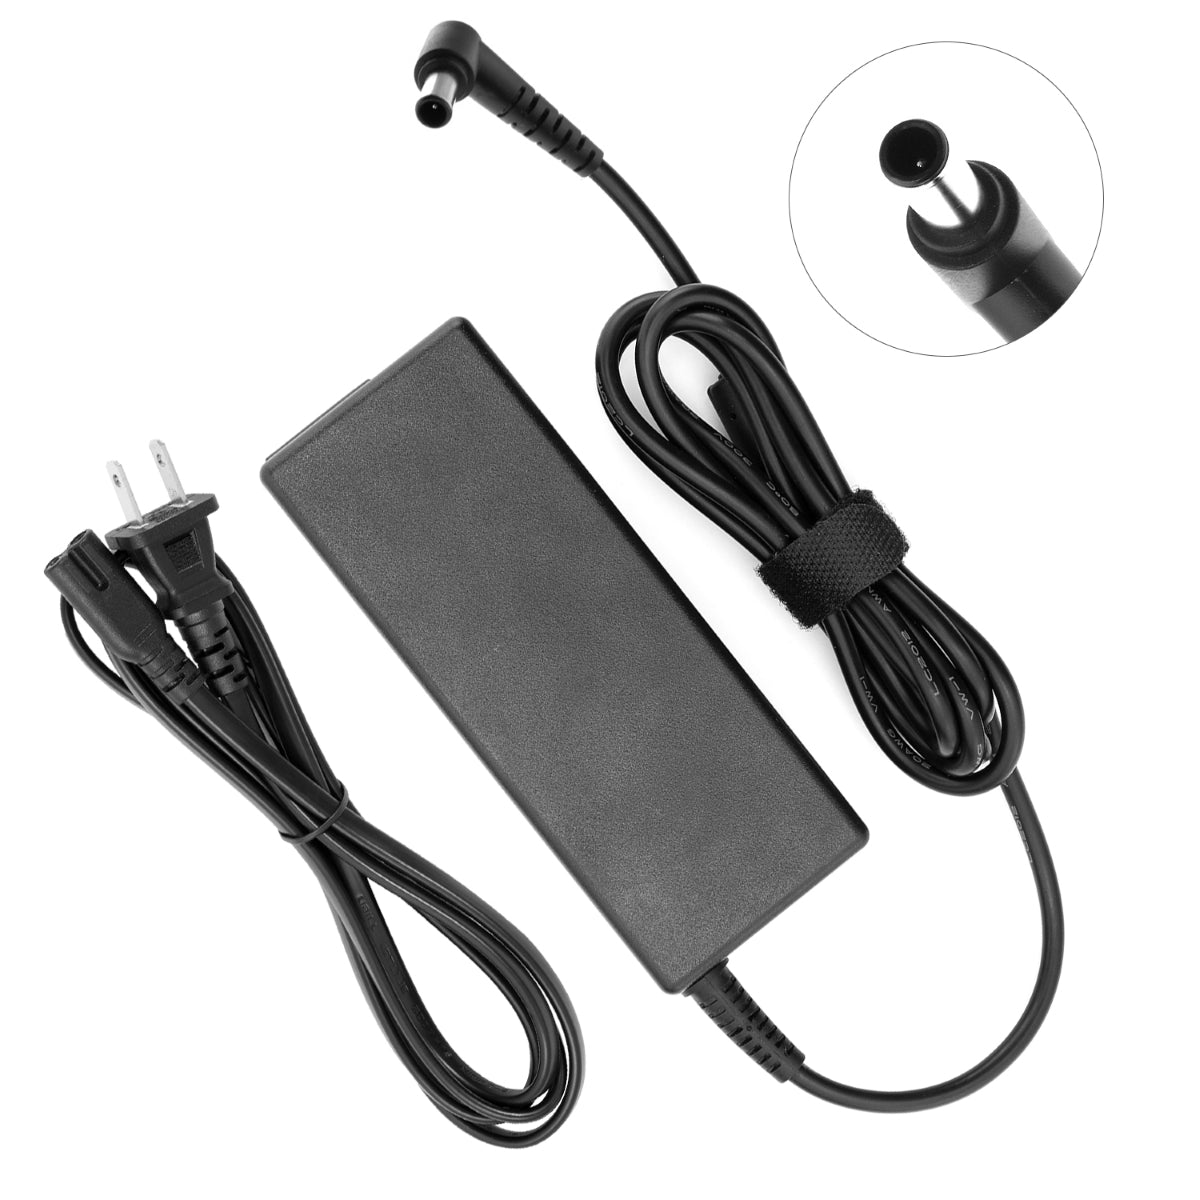 AC Adapter Power Supply for Samsung LS22C300H Monitor